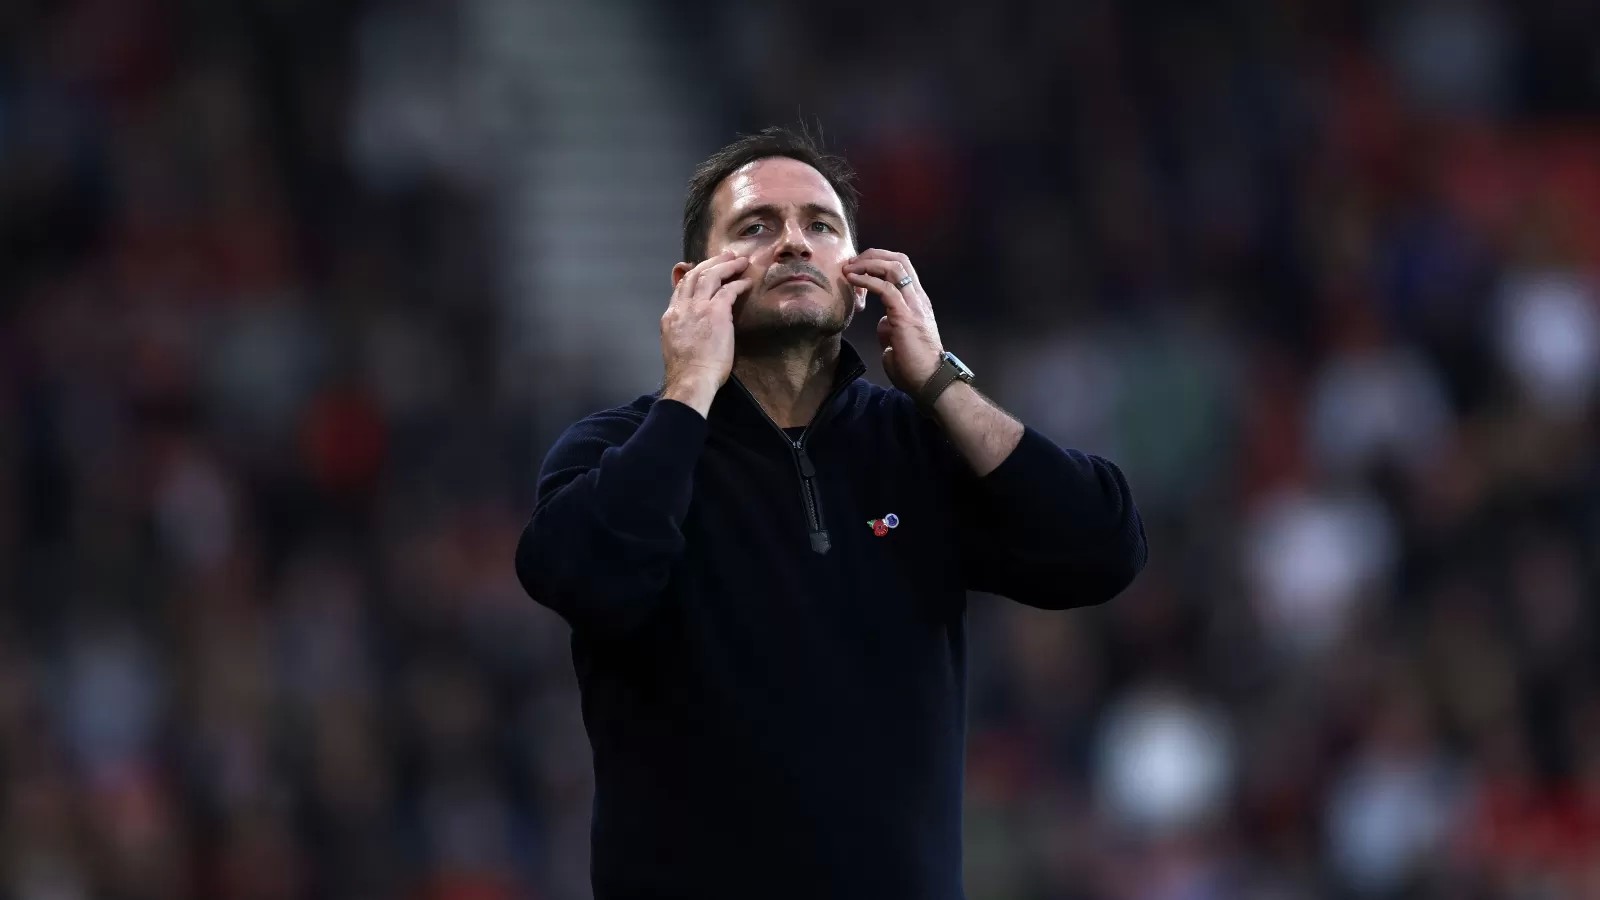 Everton may sack Lampard and make shock move for former Premier League boss